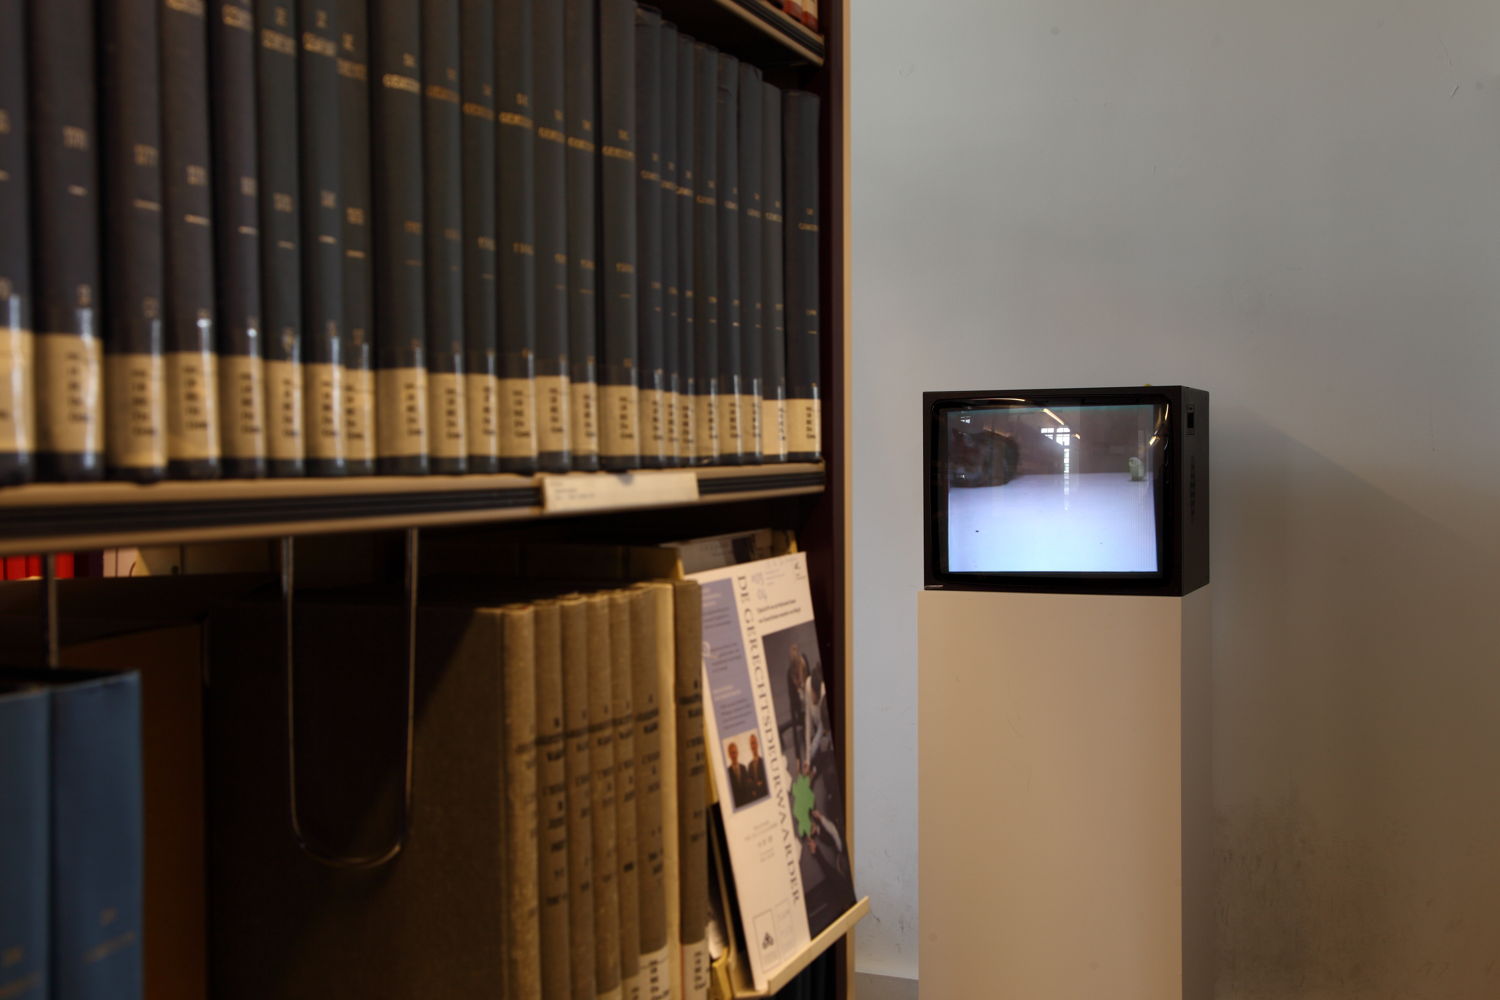 Installation view of the exhibition 'Entre nous quelque chose se passe...' in the Library of the Faculty of Law, KU Leuven.
Artist and work: David Claerbout, Cat and bird in peace (1996)
Photo © Dirk Pauwels